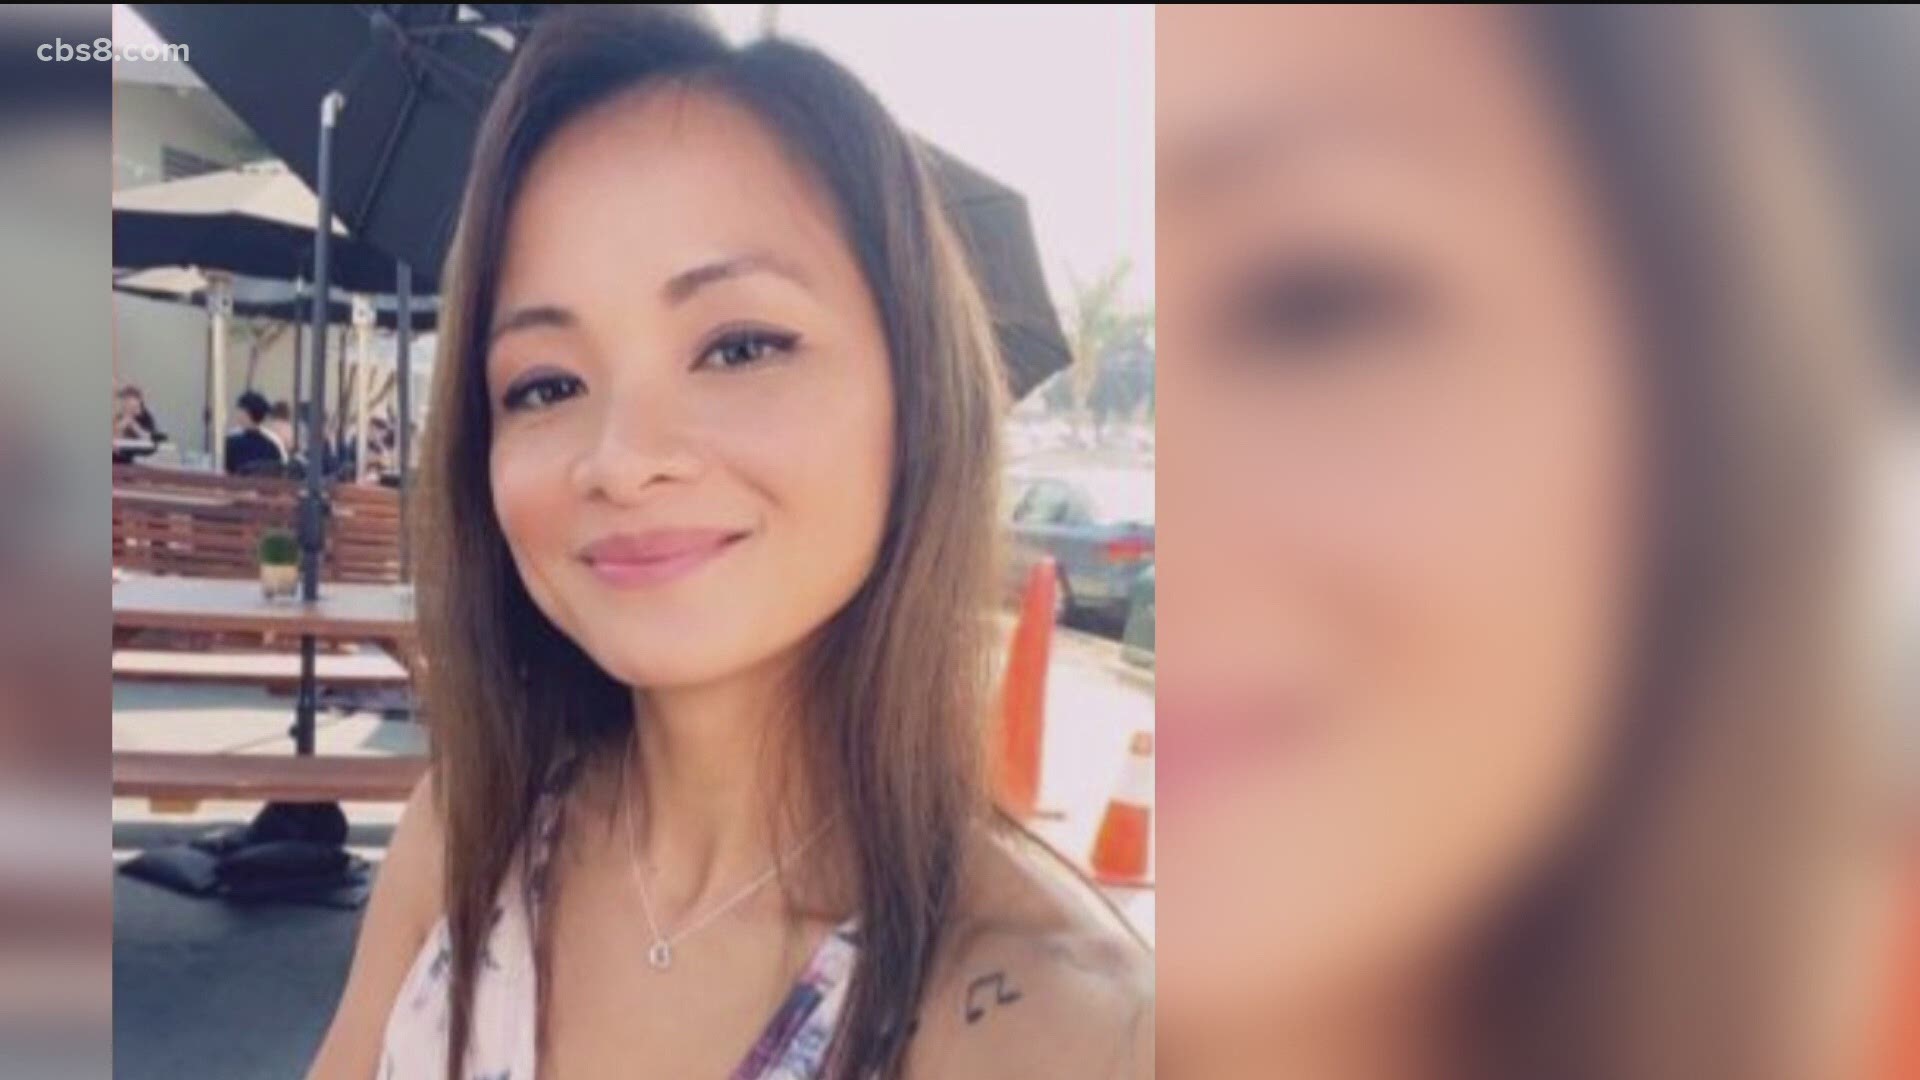 "The focus of the search warrant is to locate any evidence or any clues as to her whereabouts. Obviously, we’re concerned that she is still missing," said Lt. Miriam